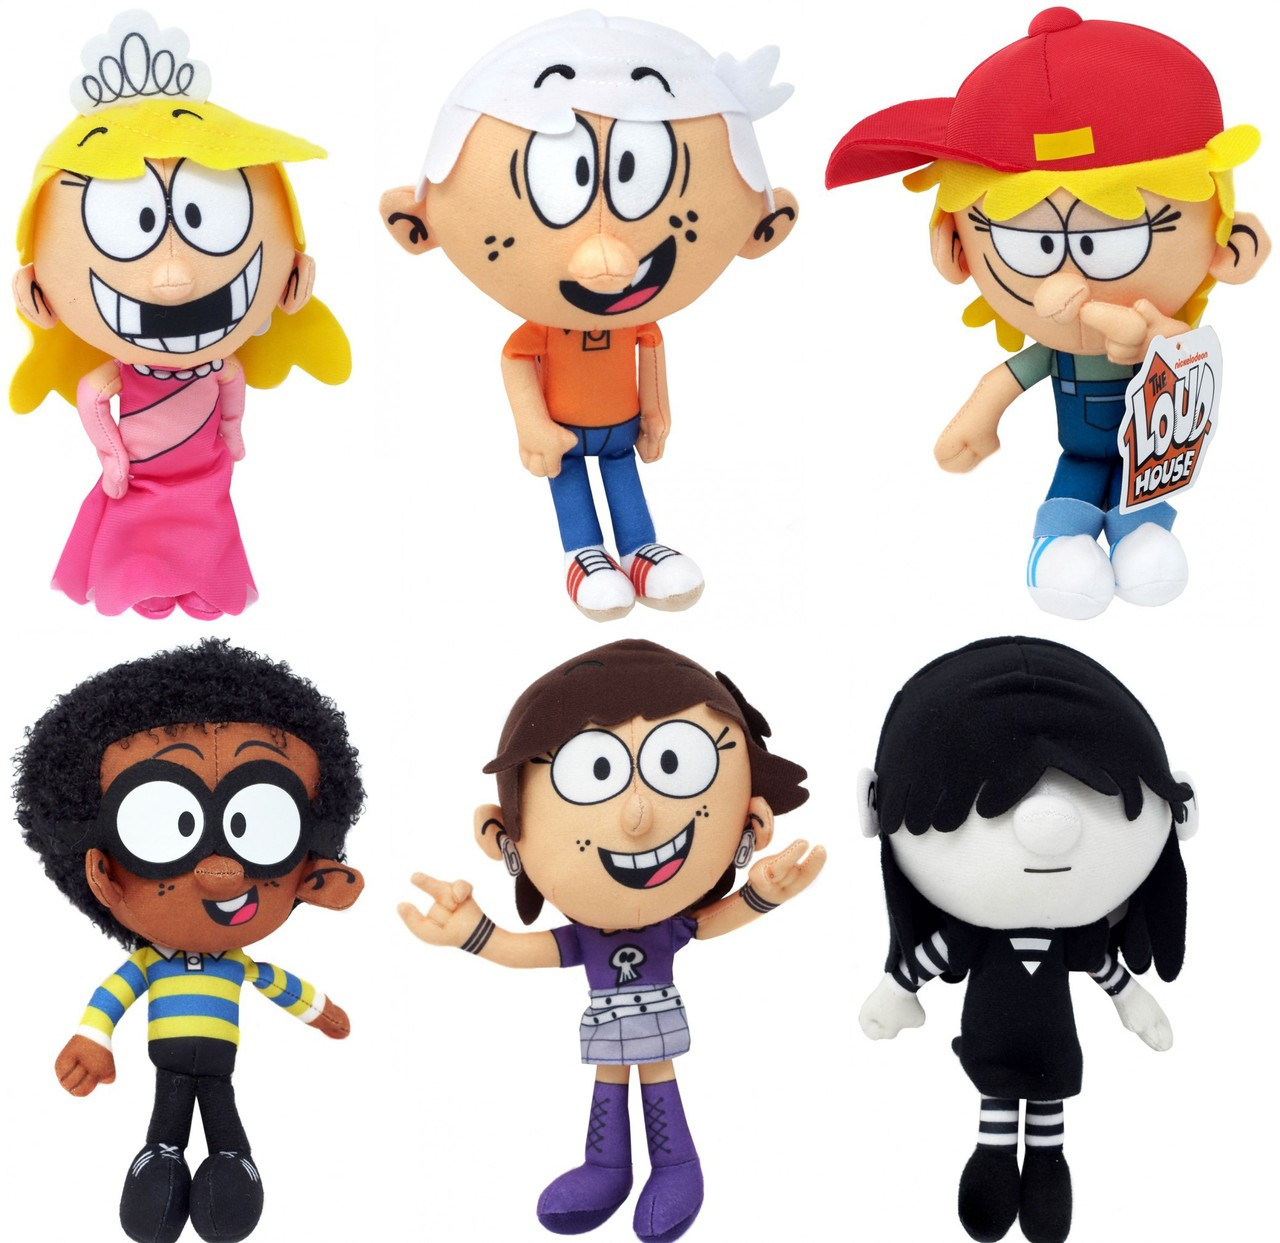 Nickelodeon Loud House Lola Luna Clyde Lana Lucy Lincoln Set Of 6 Plush Wicked Cool Toys Toywiz - the loud house in roblox